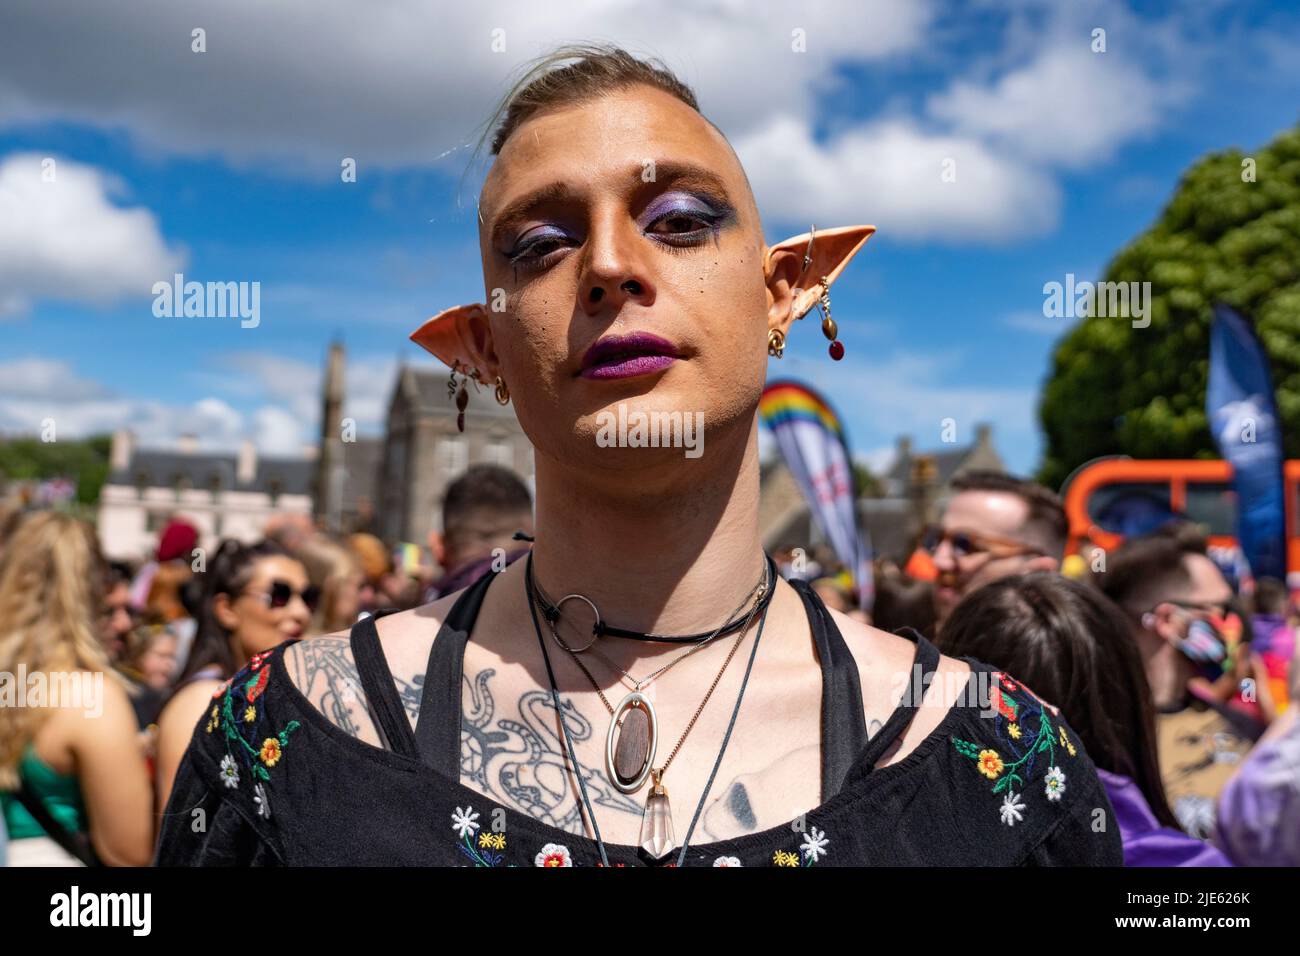 Edinburgh, Scotland, UK. 25 June 2022.  The annual Pride Edinburgh march taking place in city centre of Edinburgh today.  Thousands of people met at the Scottish Parliament at Holyrood before marching through the Old Town to rally at Bristo Square. Iain Masterton/Alamy Live News Stock Photo